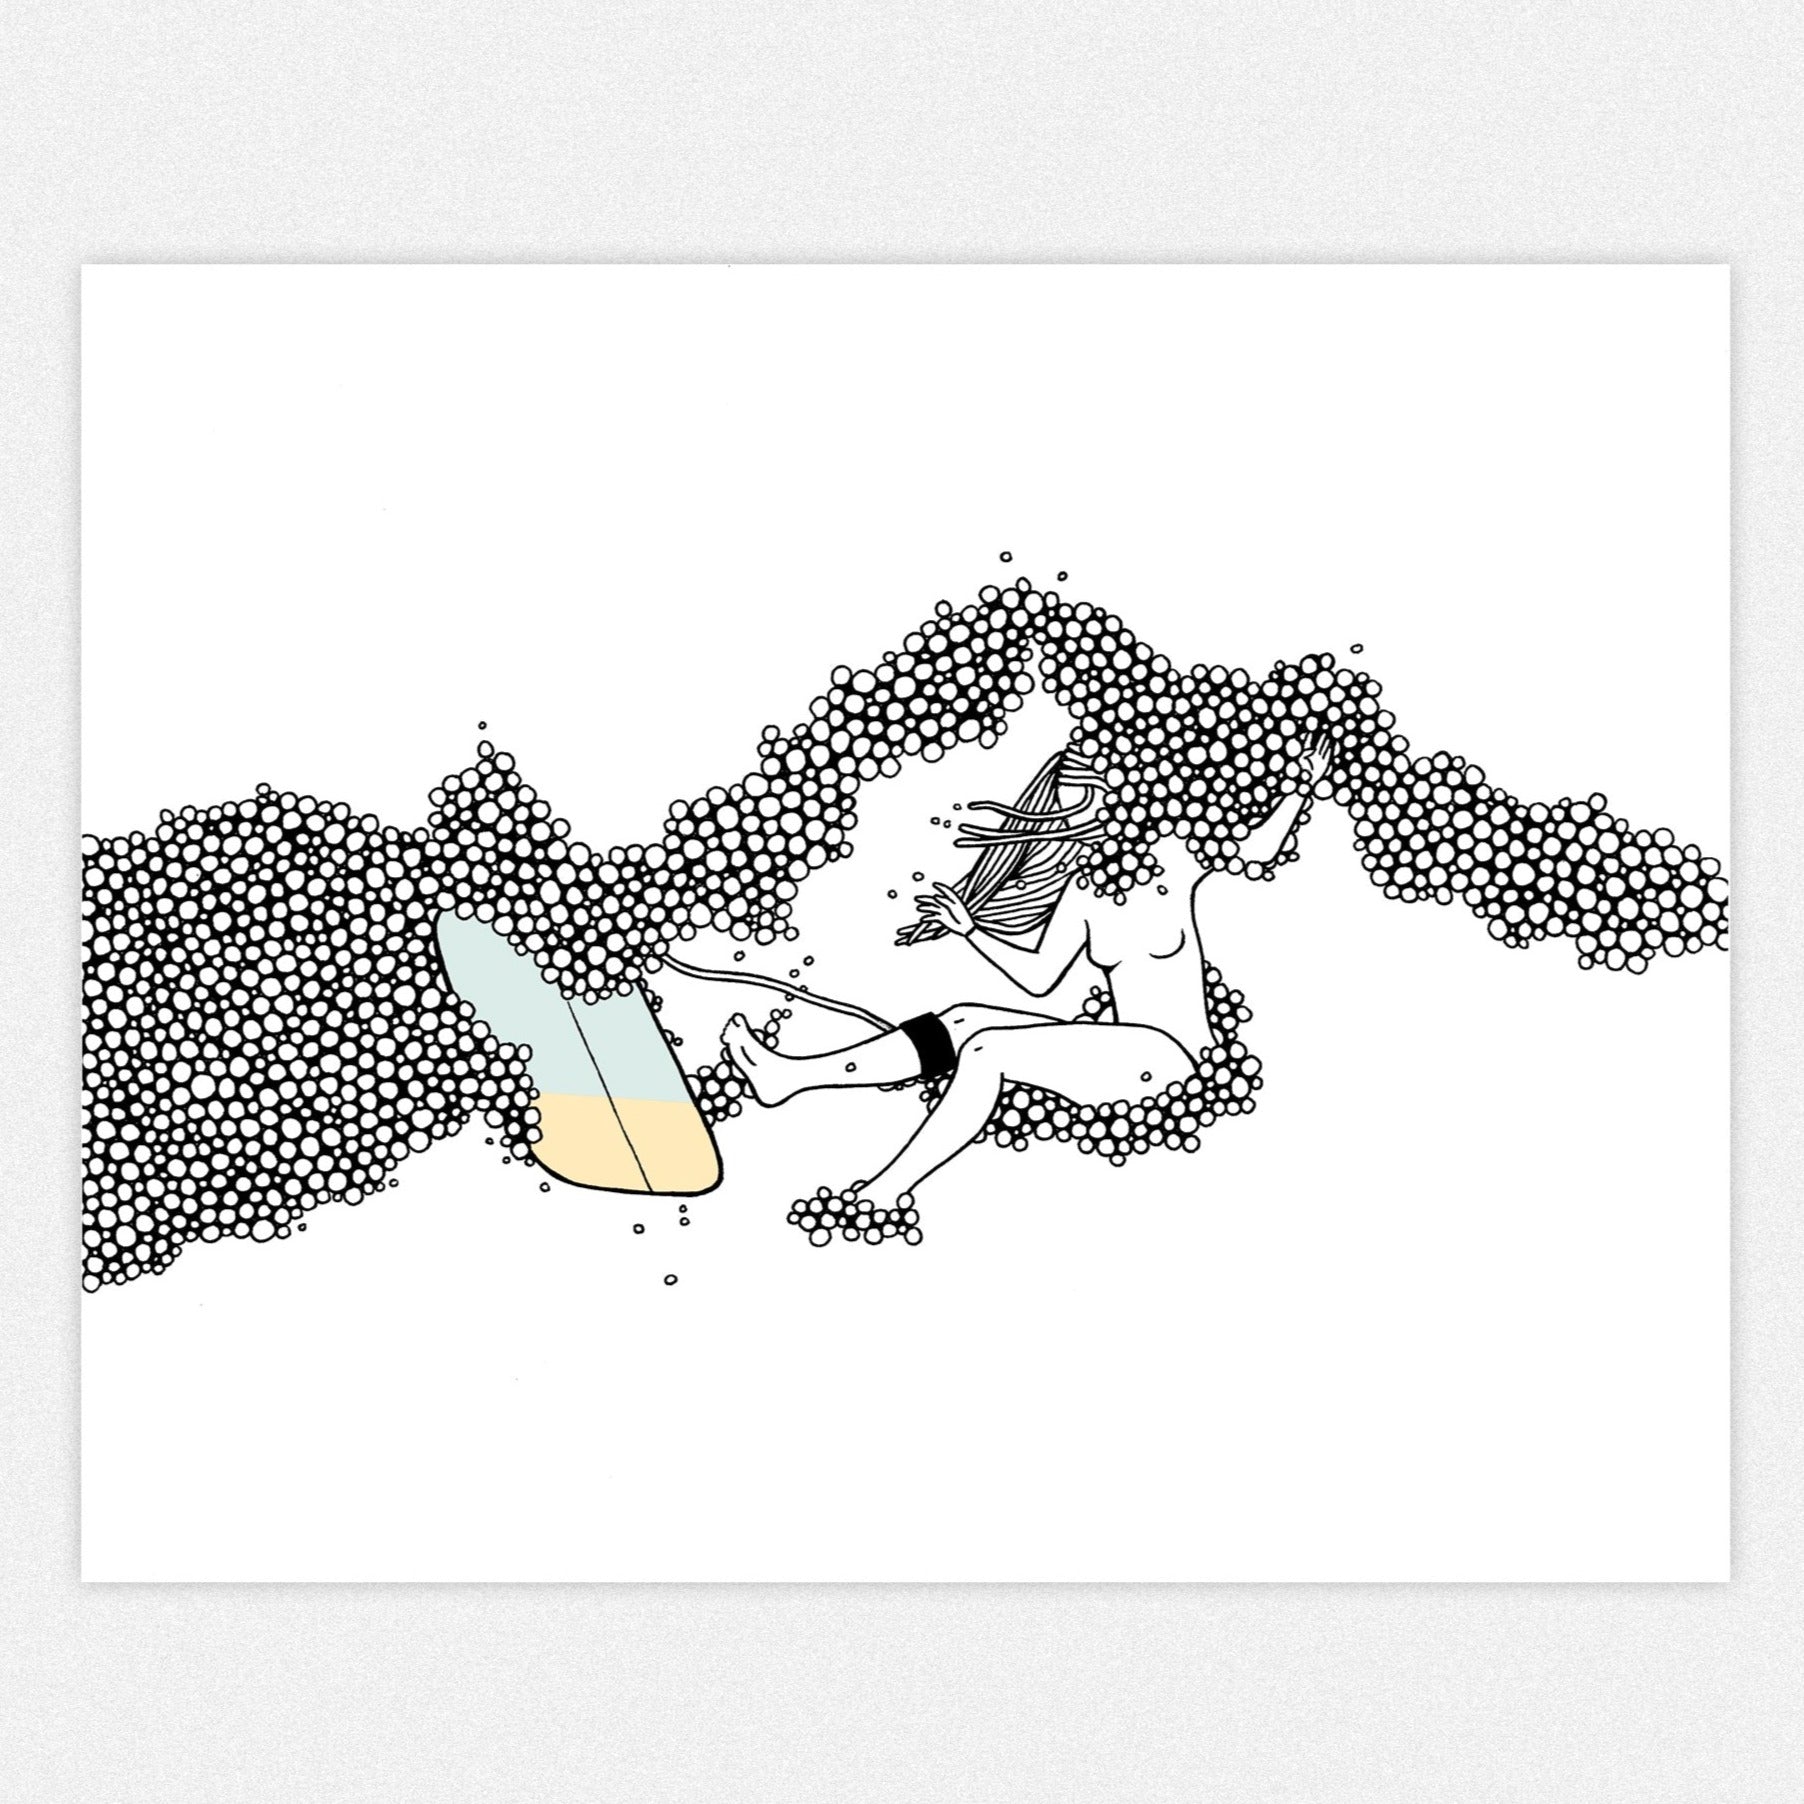 Wipeouts | A Pair of Surf Art Prints